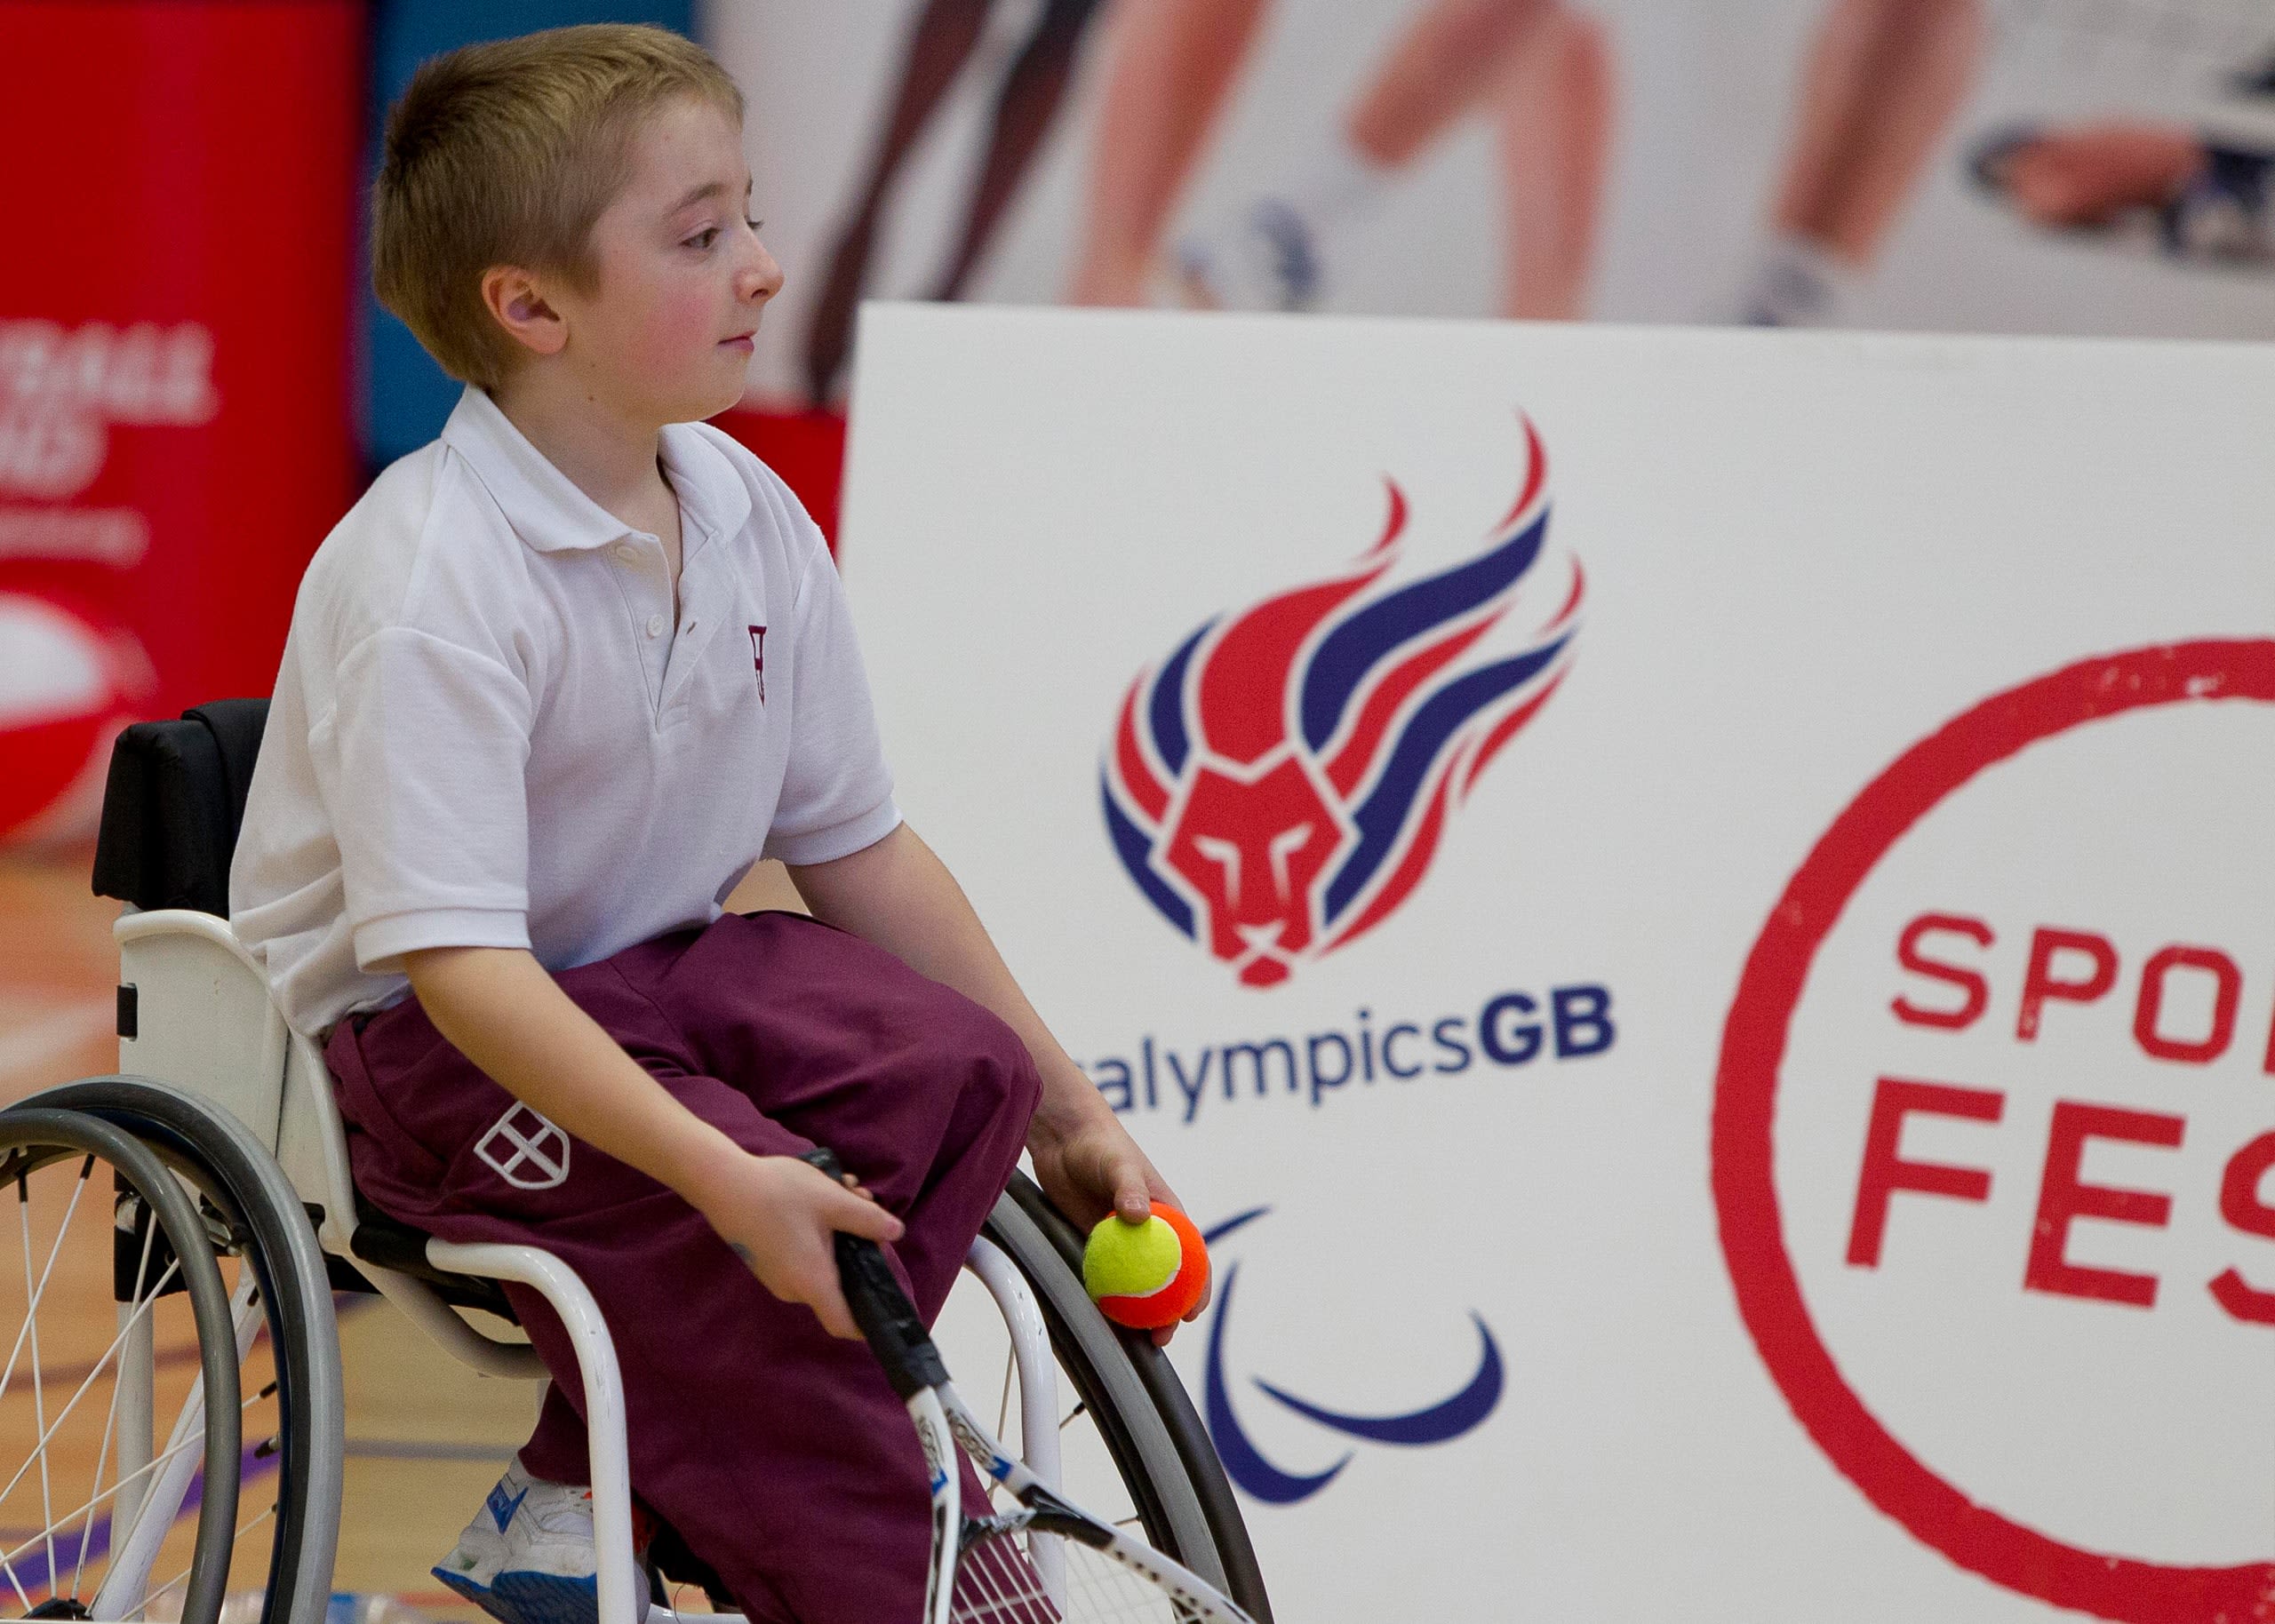 Young wheelchair tennis player at the ParalympicsGB Sports Festival 2012